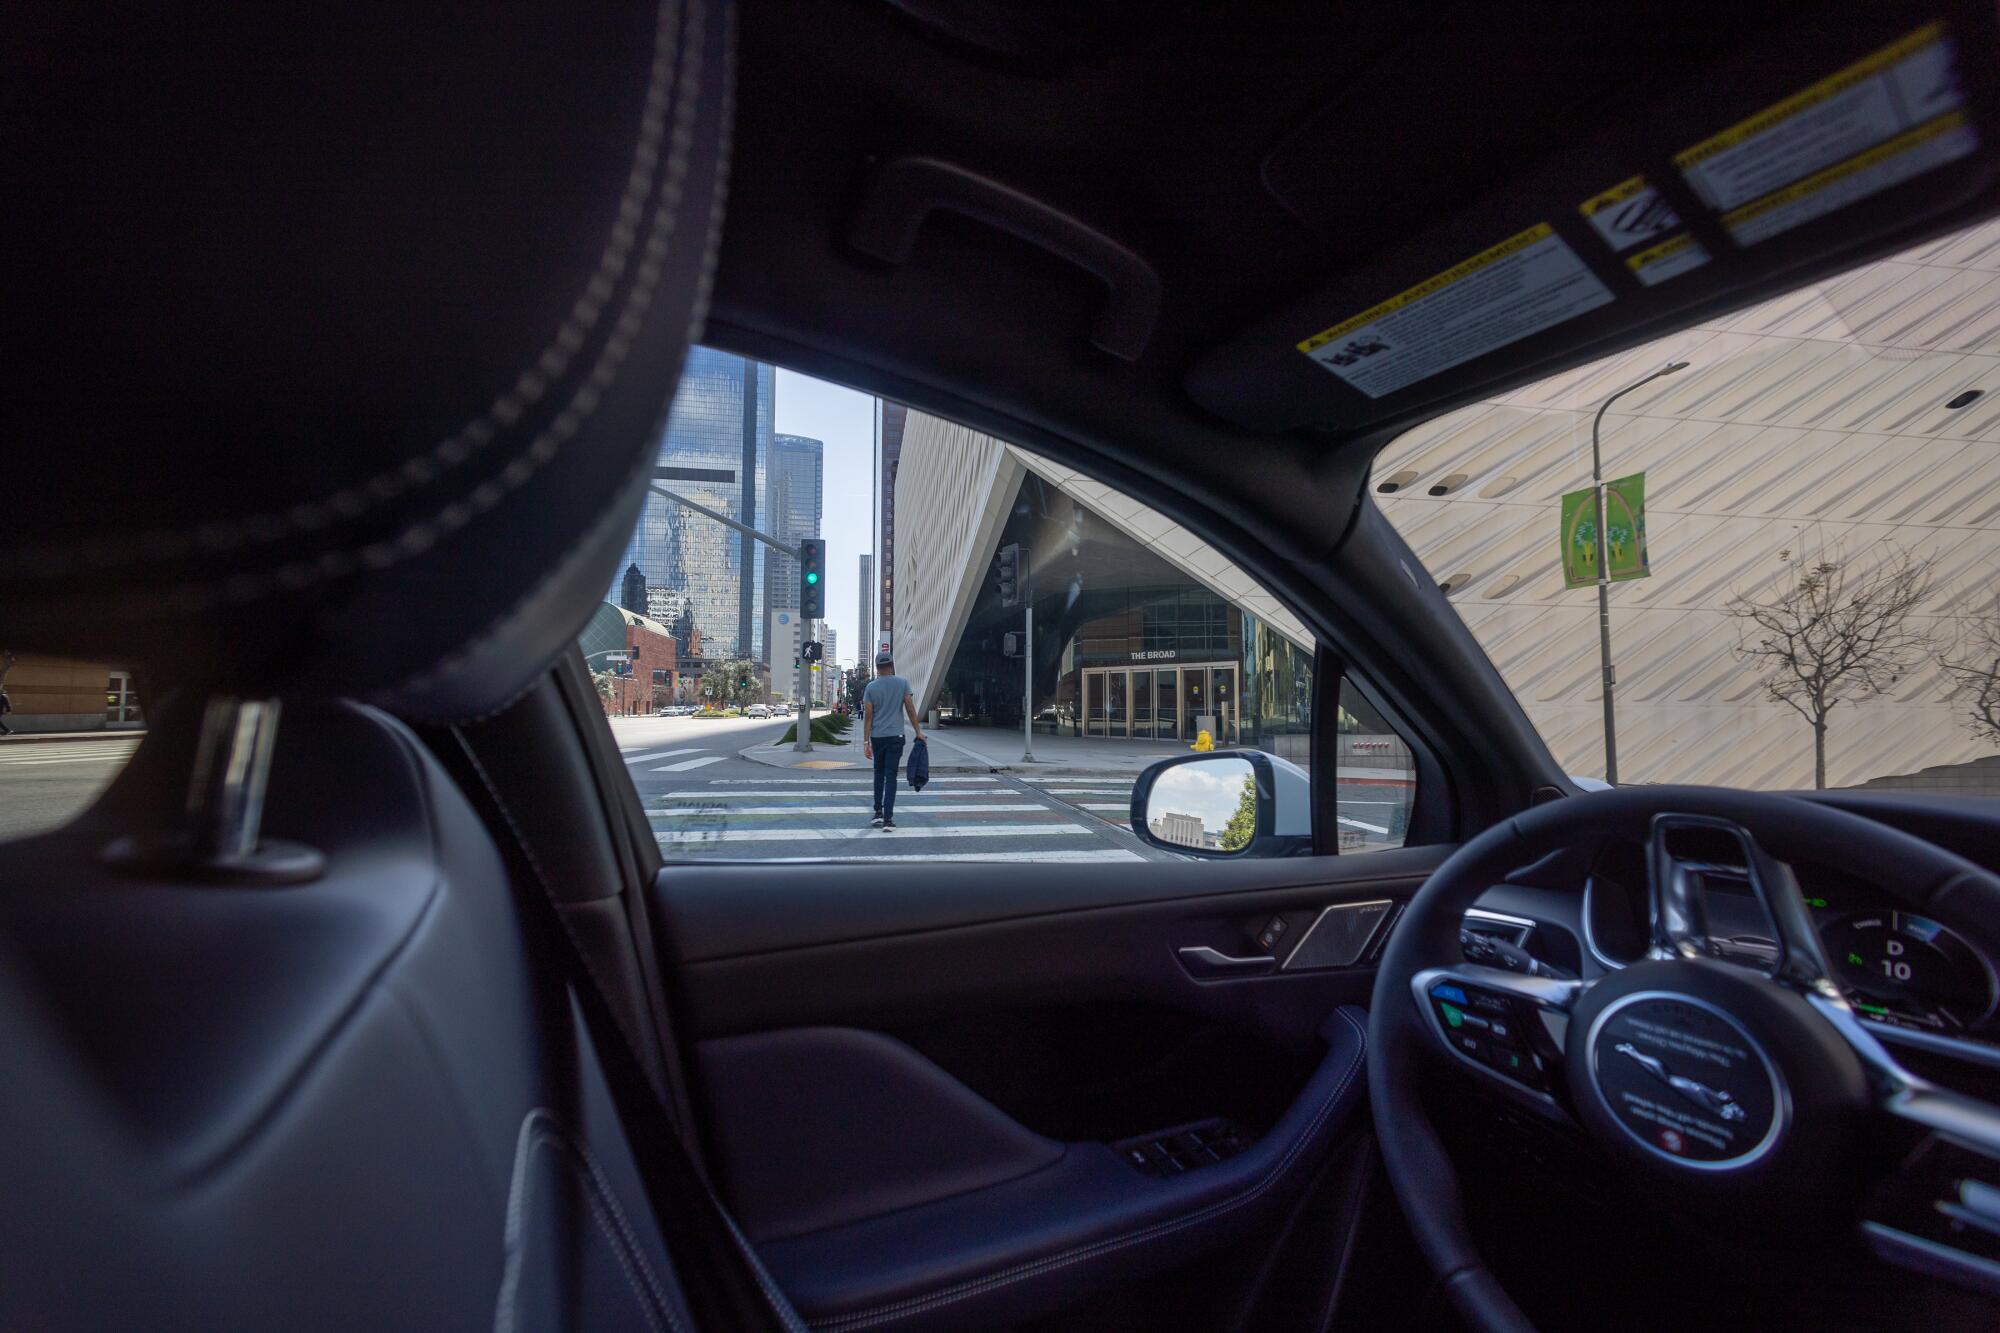 A person in a crosswalk is seen through the driver's side window of a driverless electric vehicle.